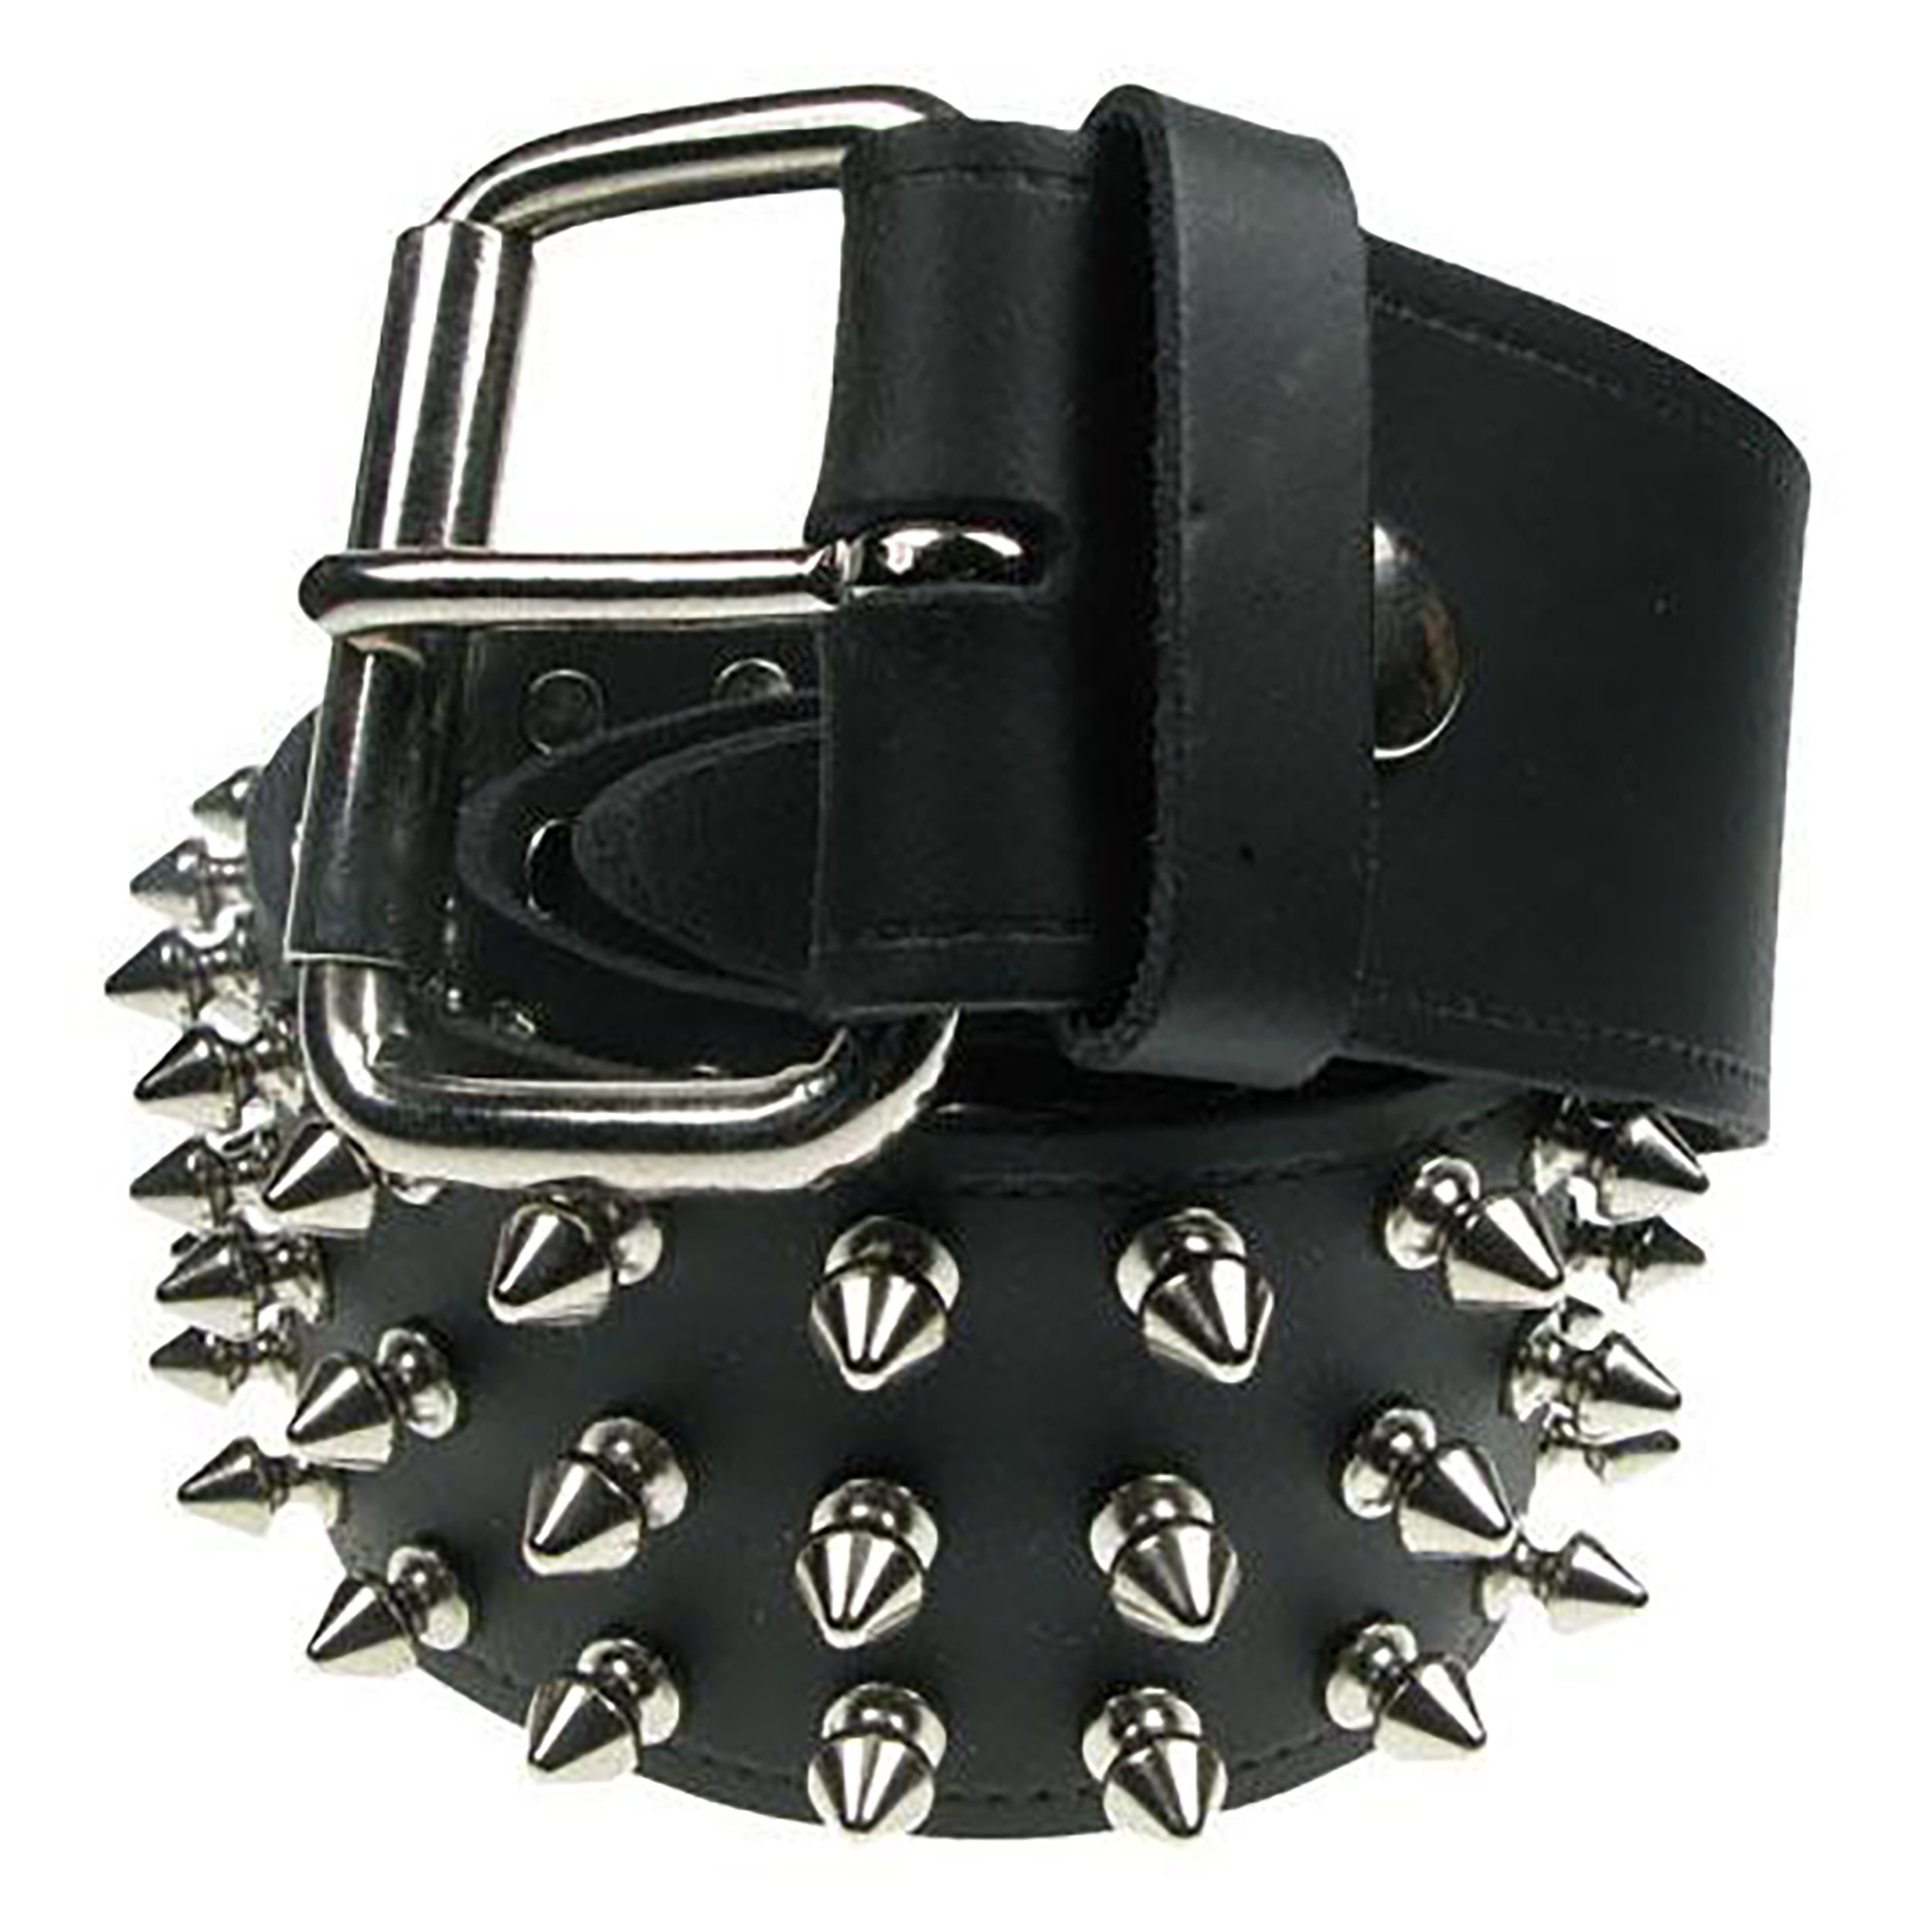 Stud Belt With Spike Studs. Studded Belt With 1 2 3 or 4 - Etsy UK